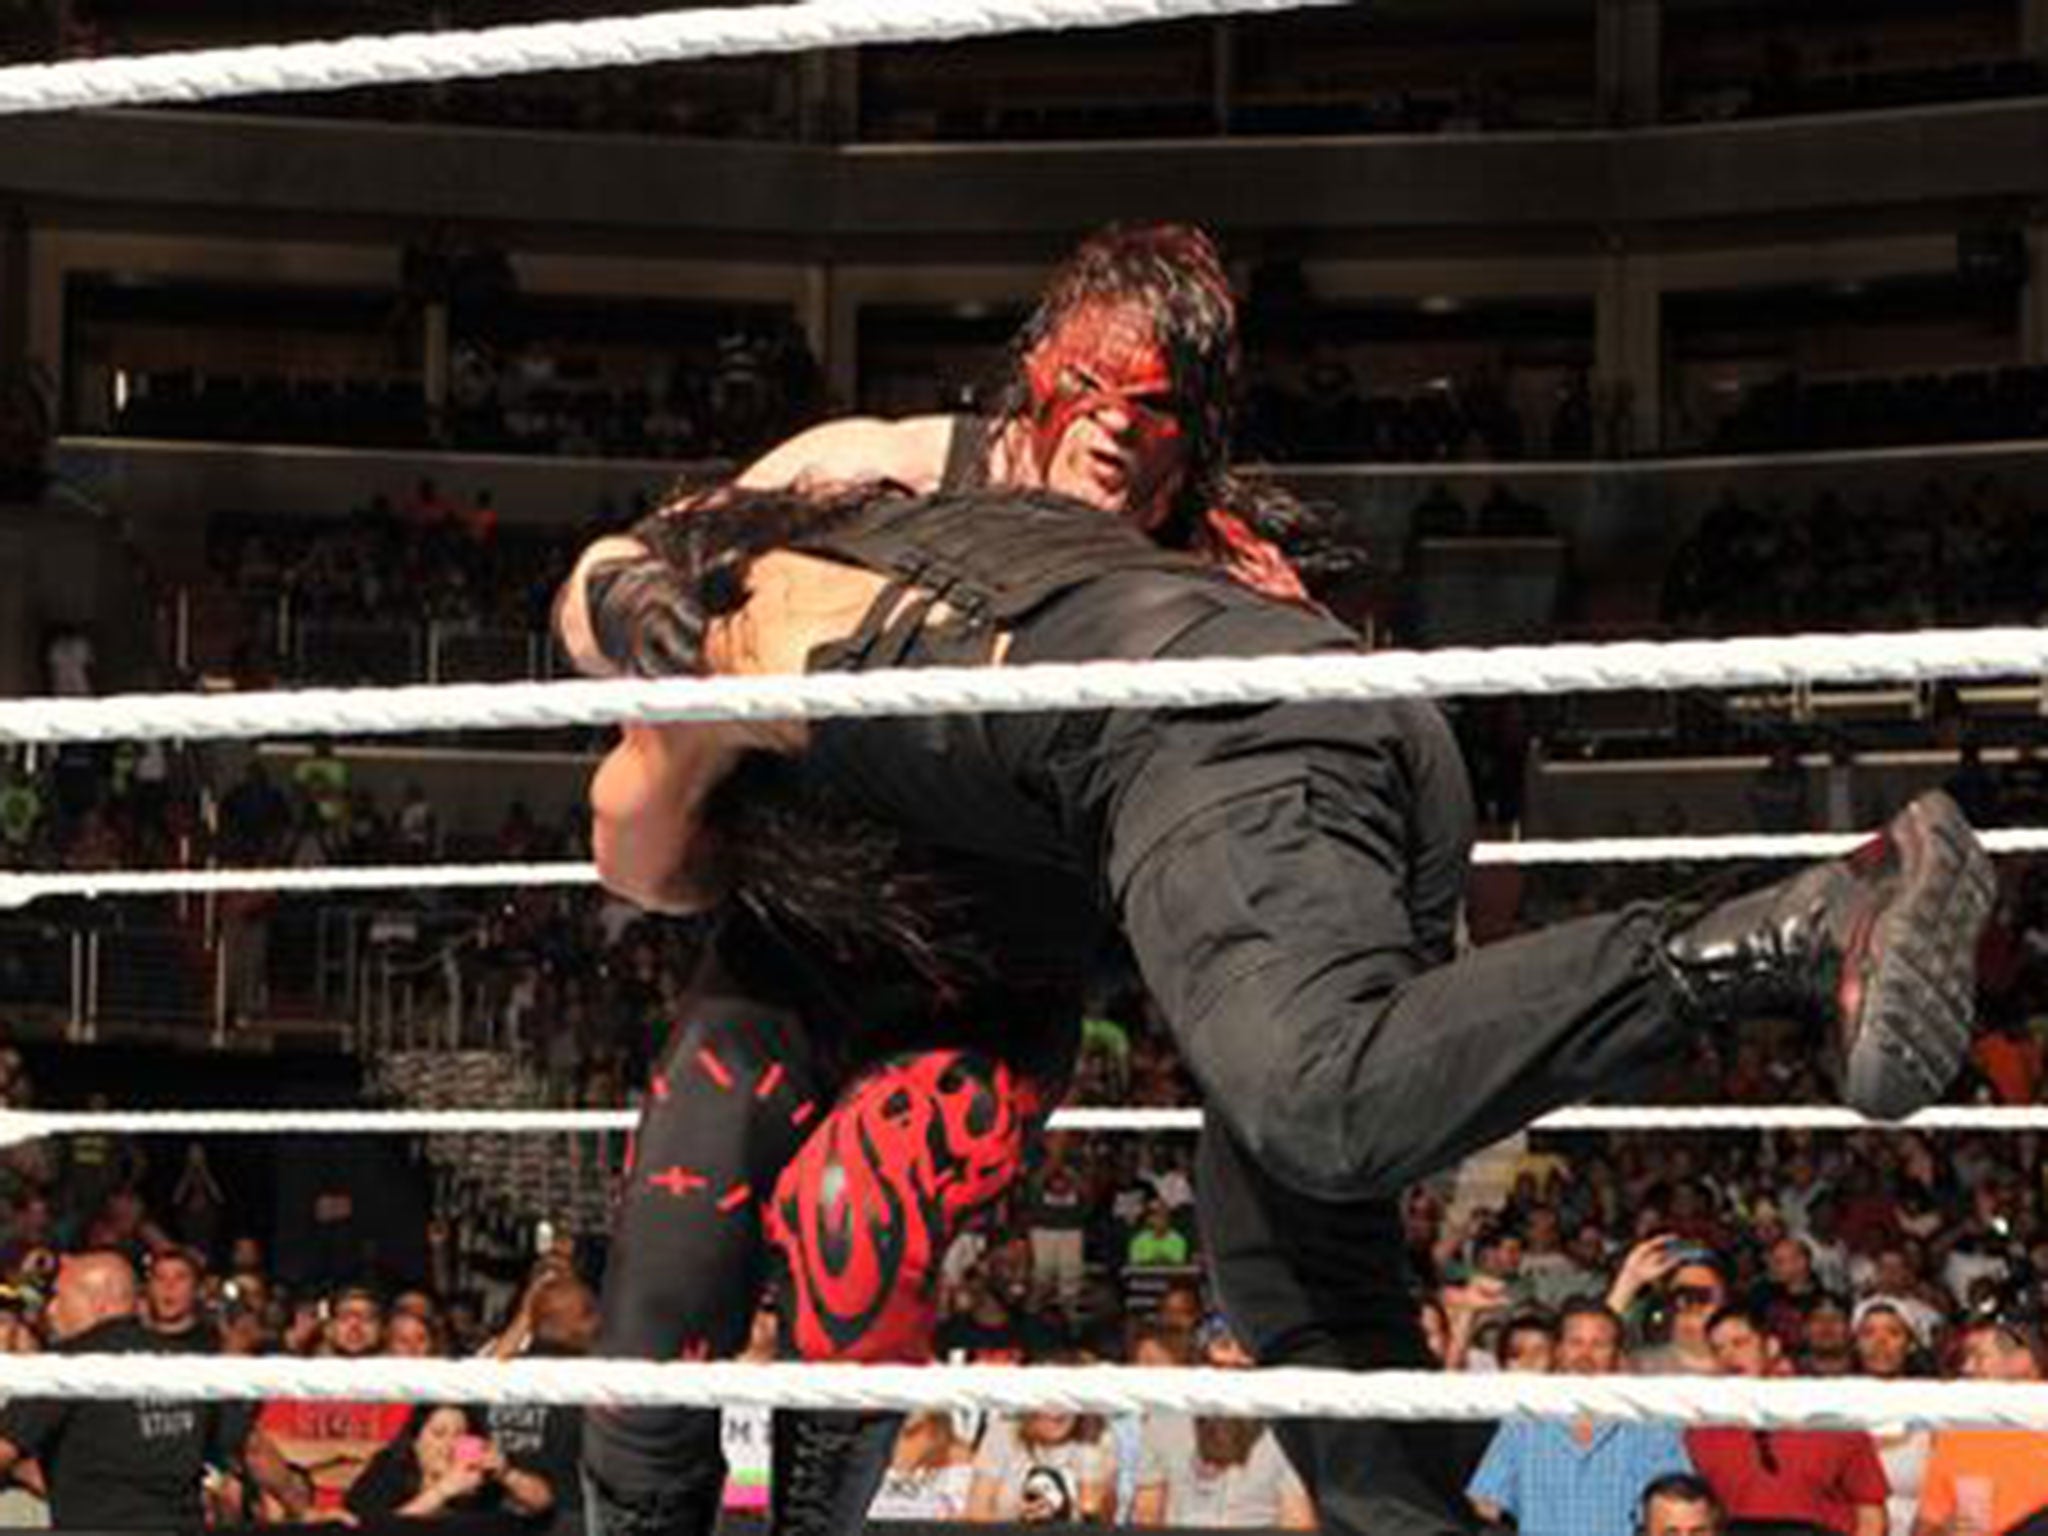 Roman Reigns hits Kane with a spear